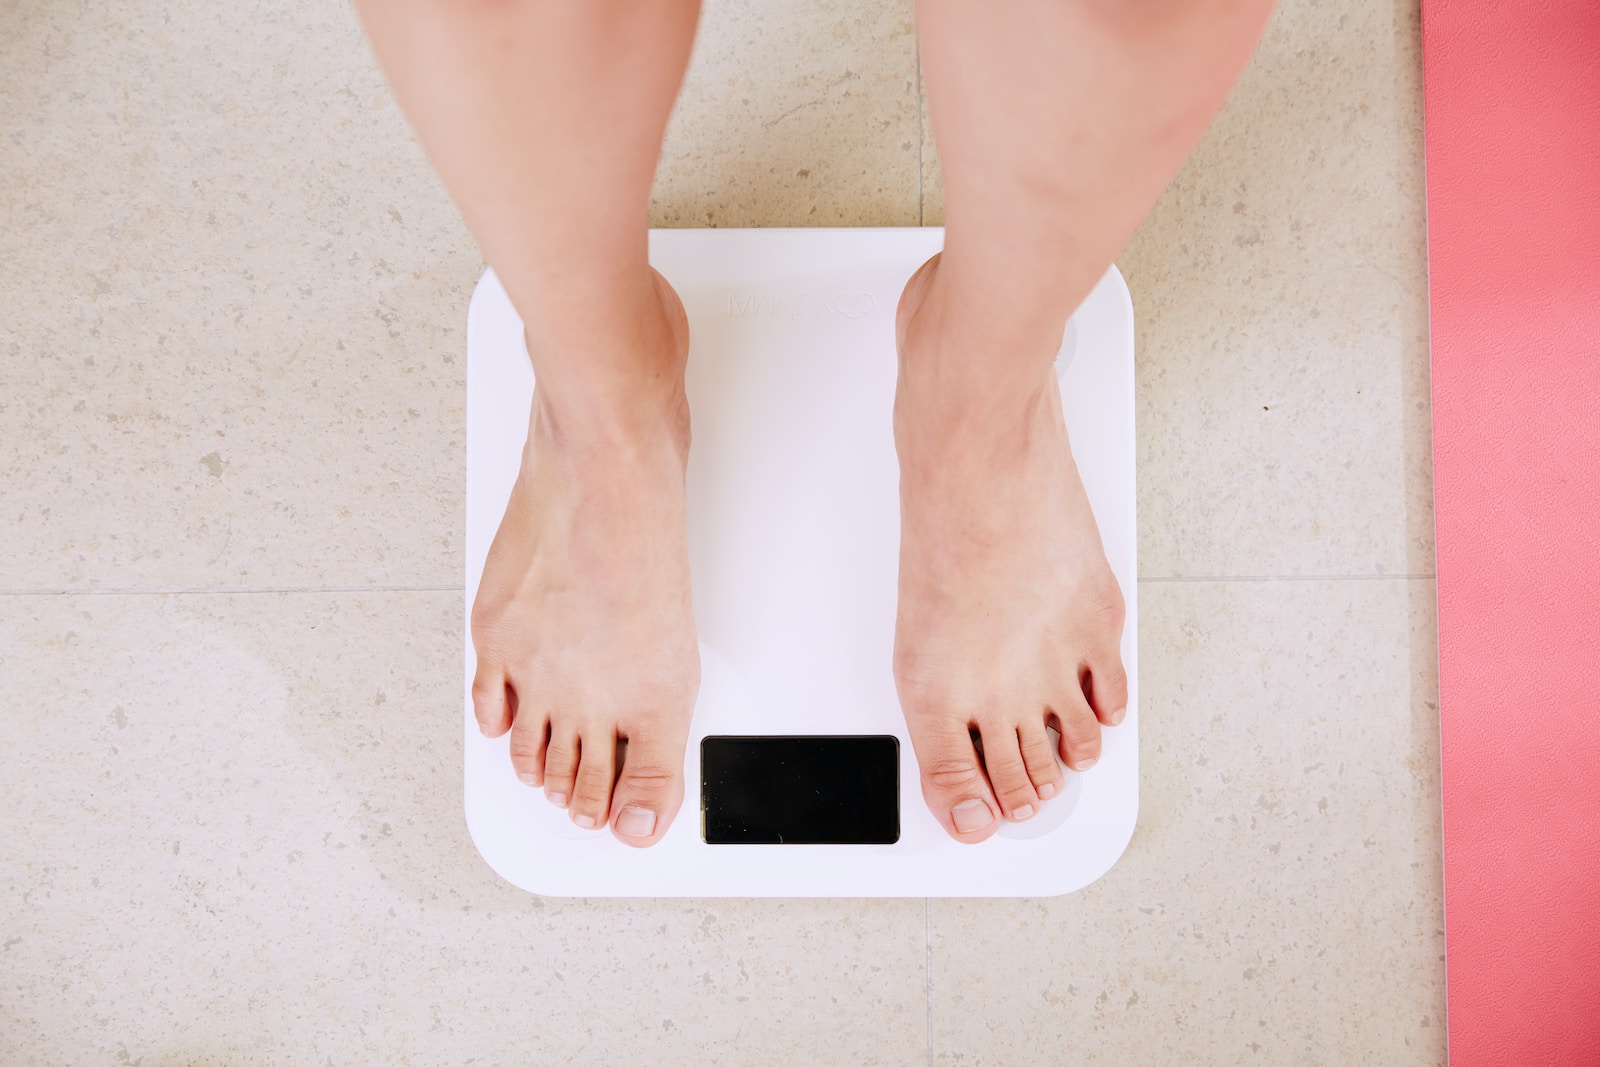 Exercise doesn't help lose weight Weight Maintenance